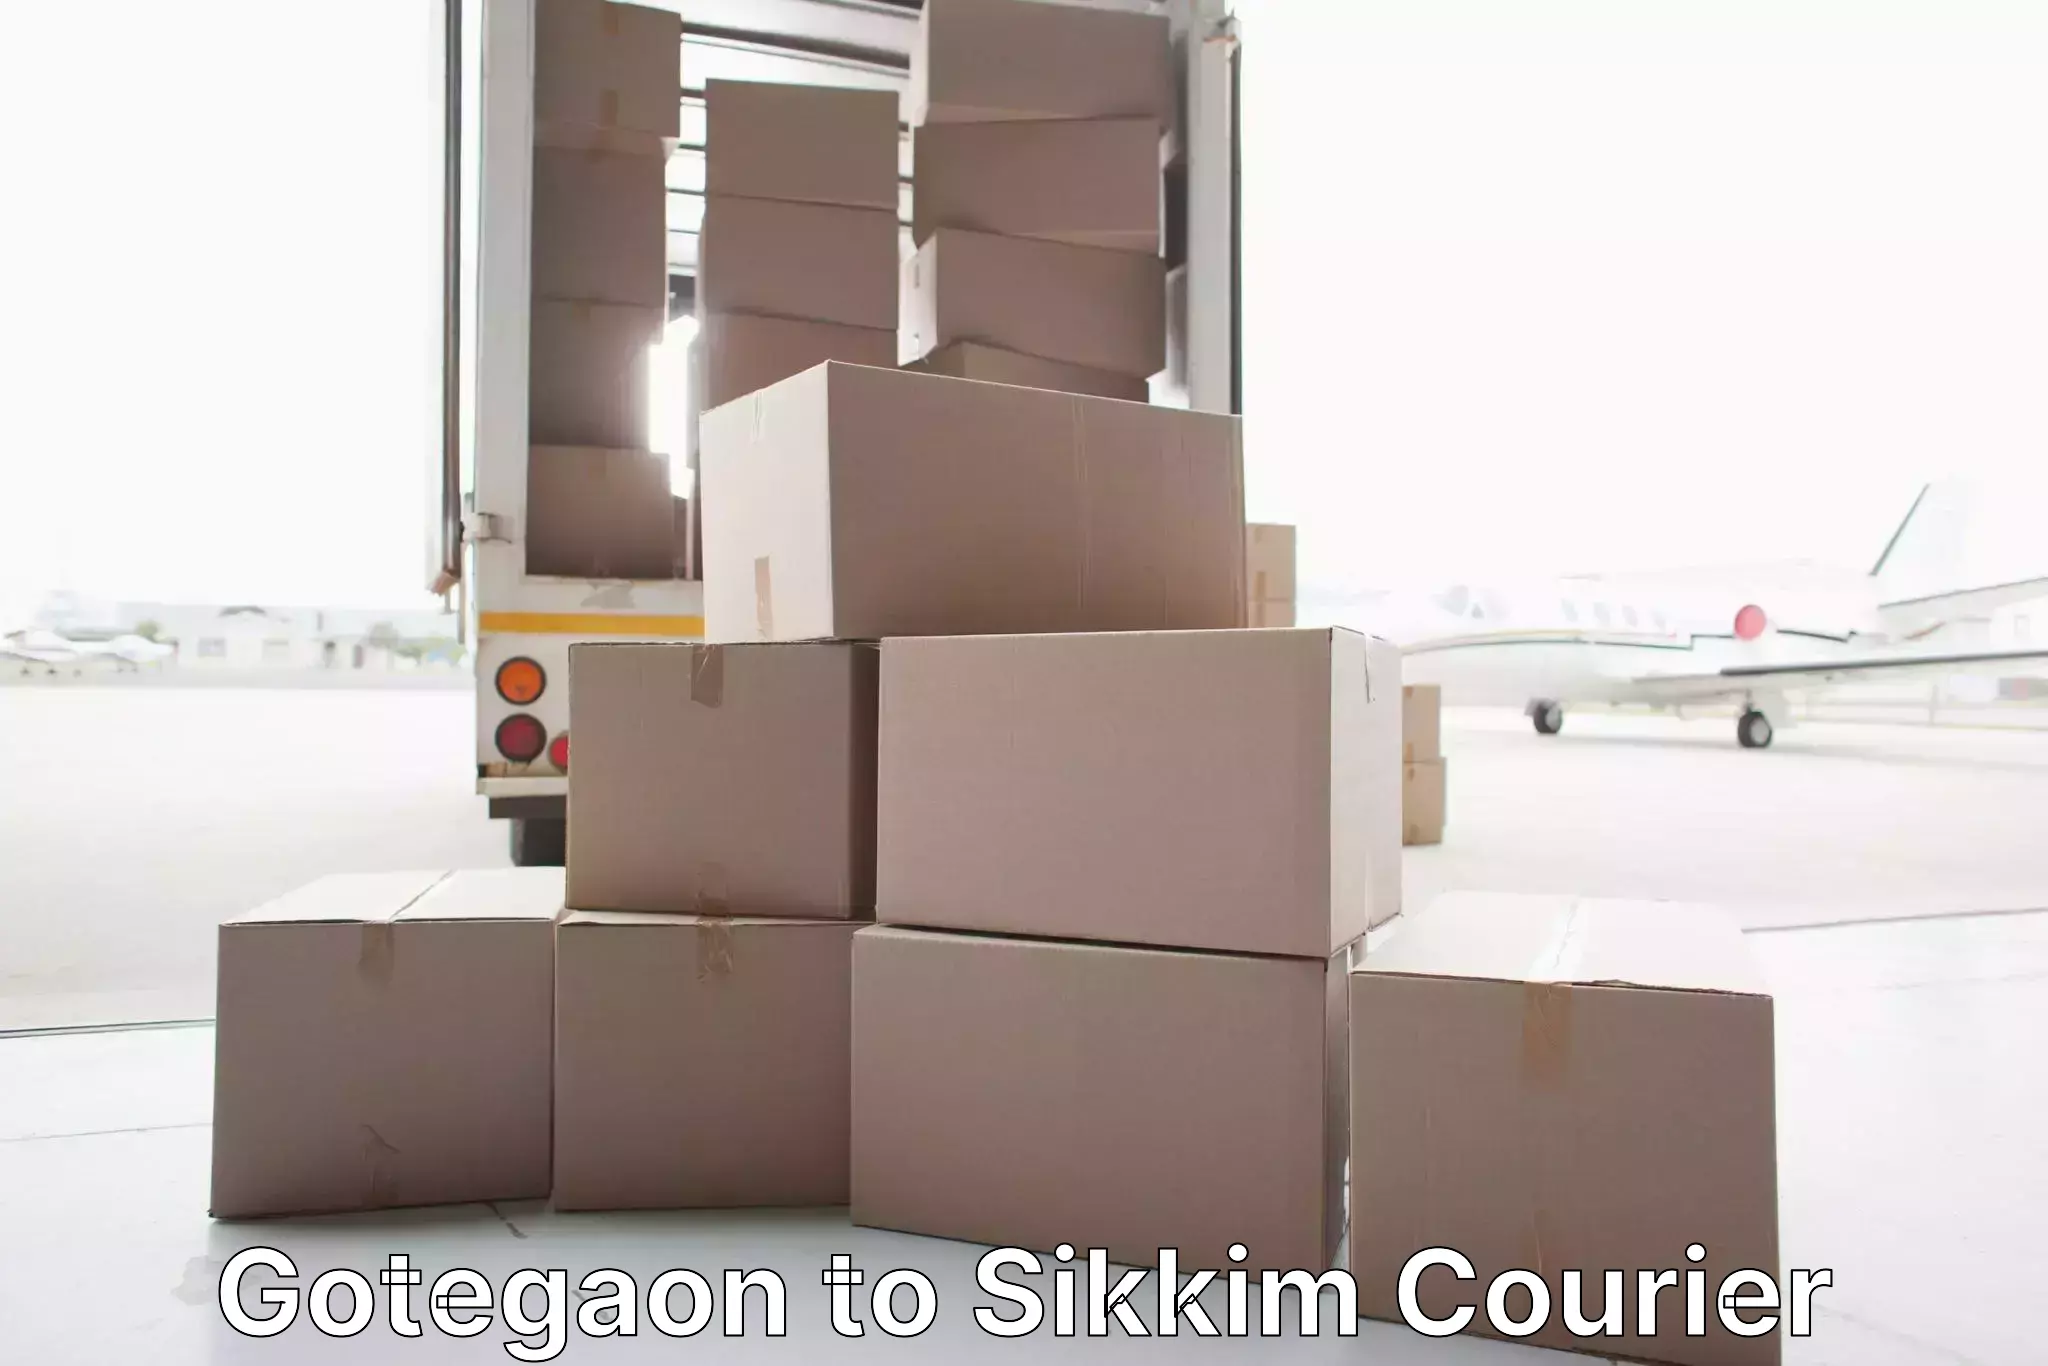 Home moving specialists Gotegaon to Sikkim